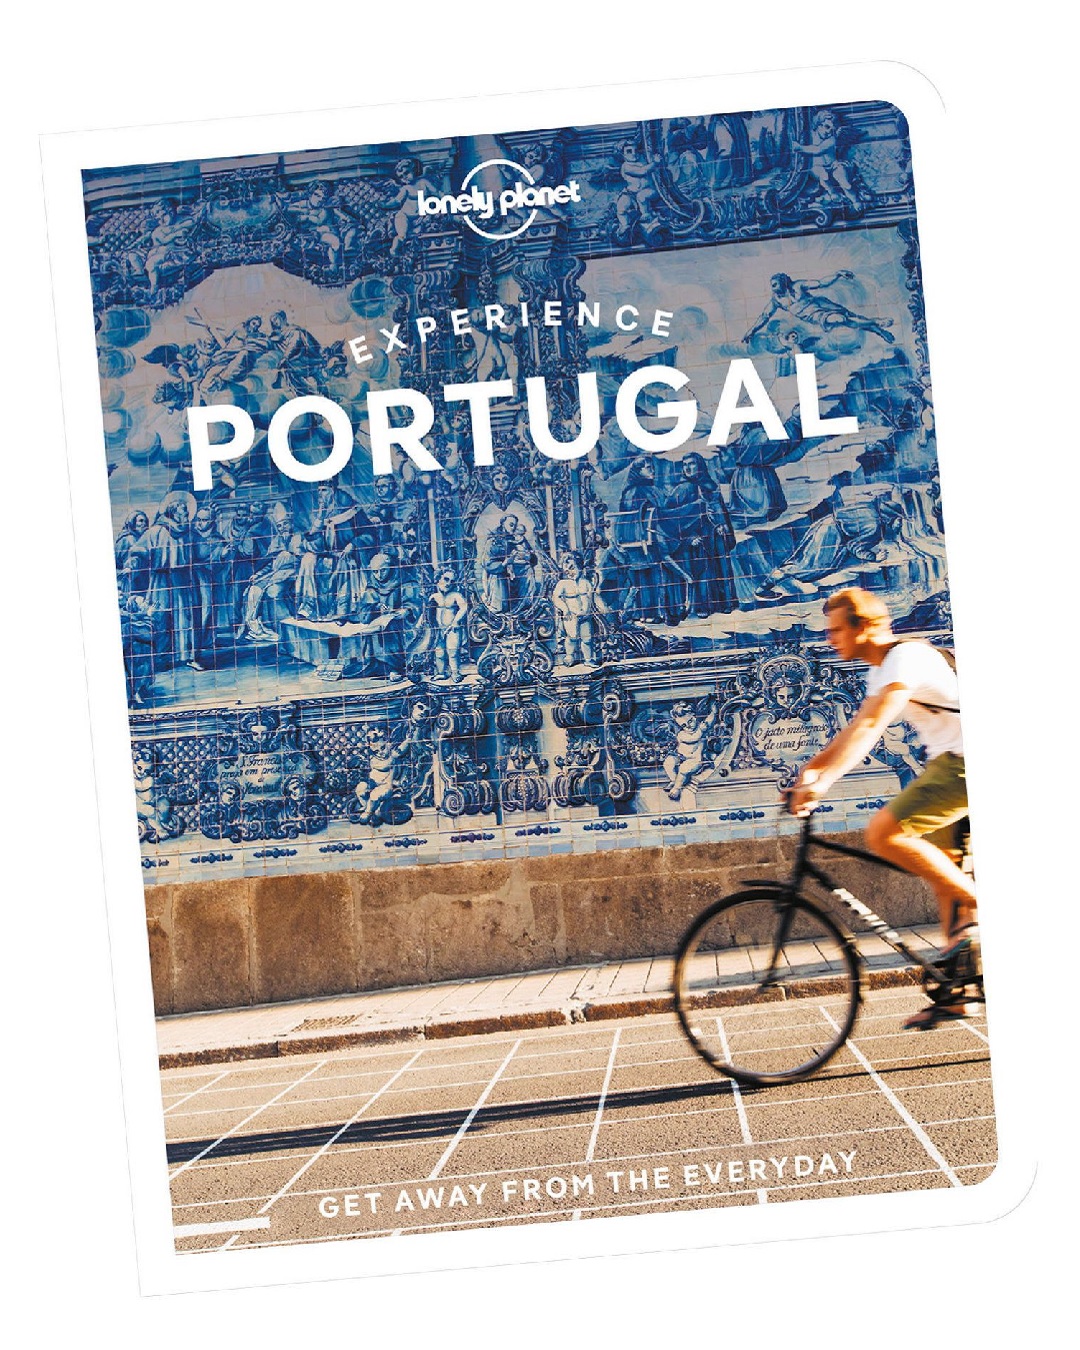 Experience Portugal